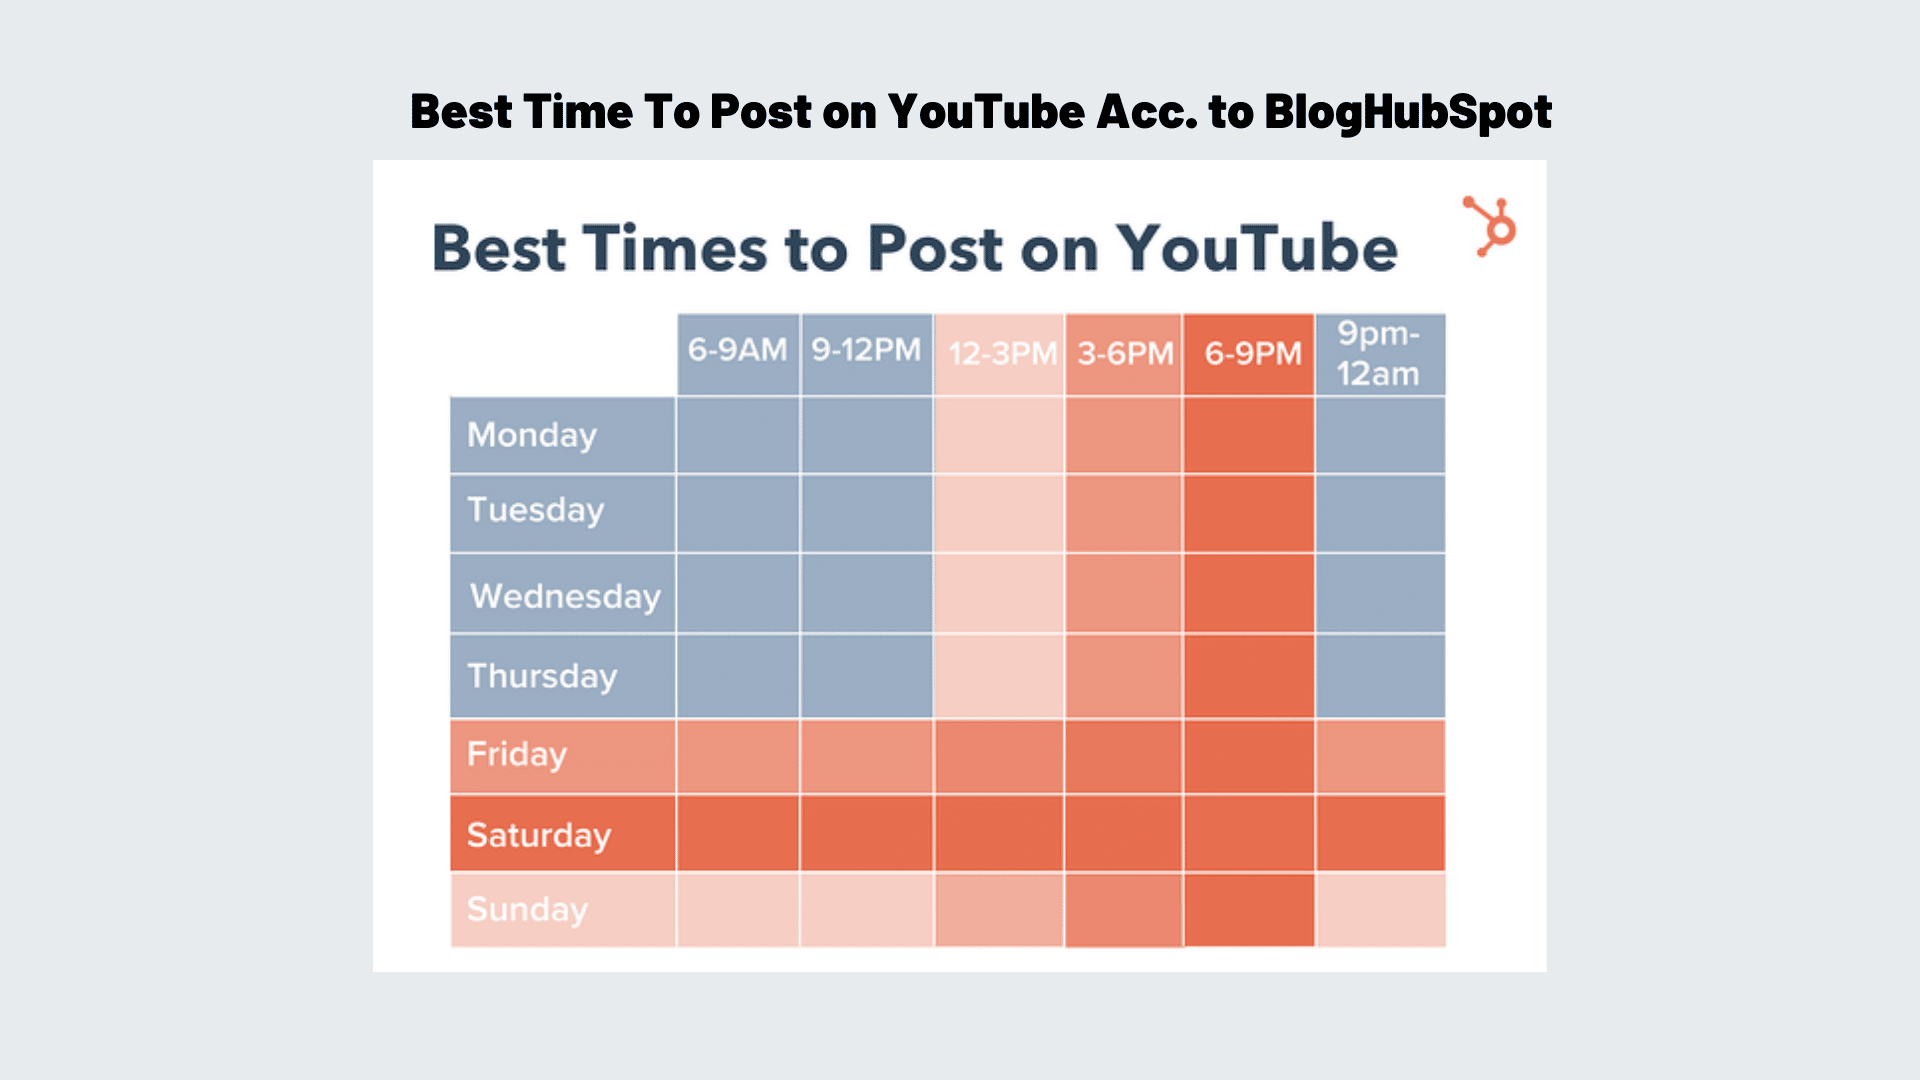 best time to post on youtube acc. to blog hubspot